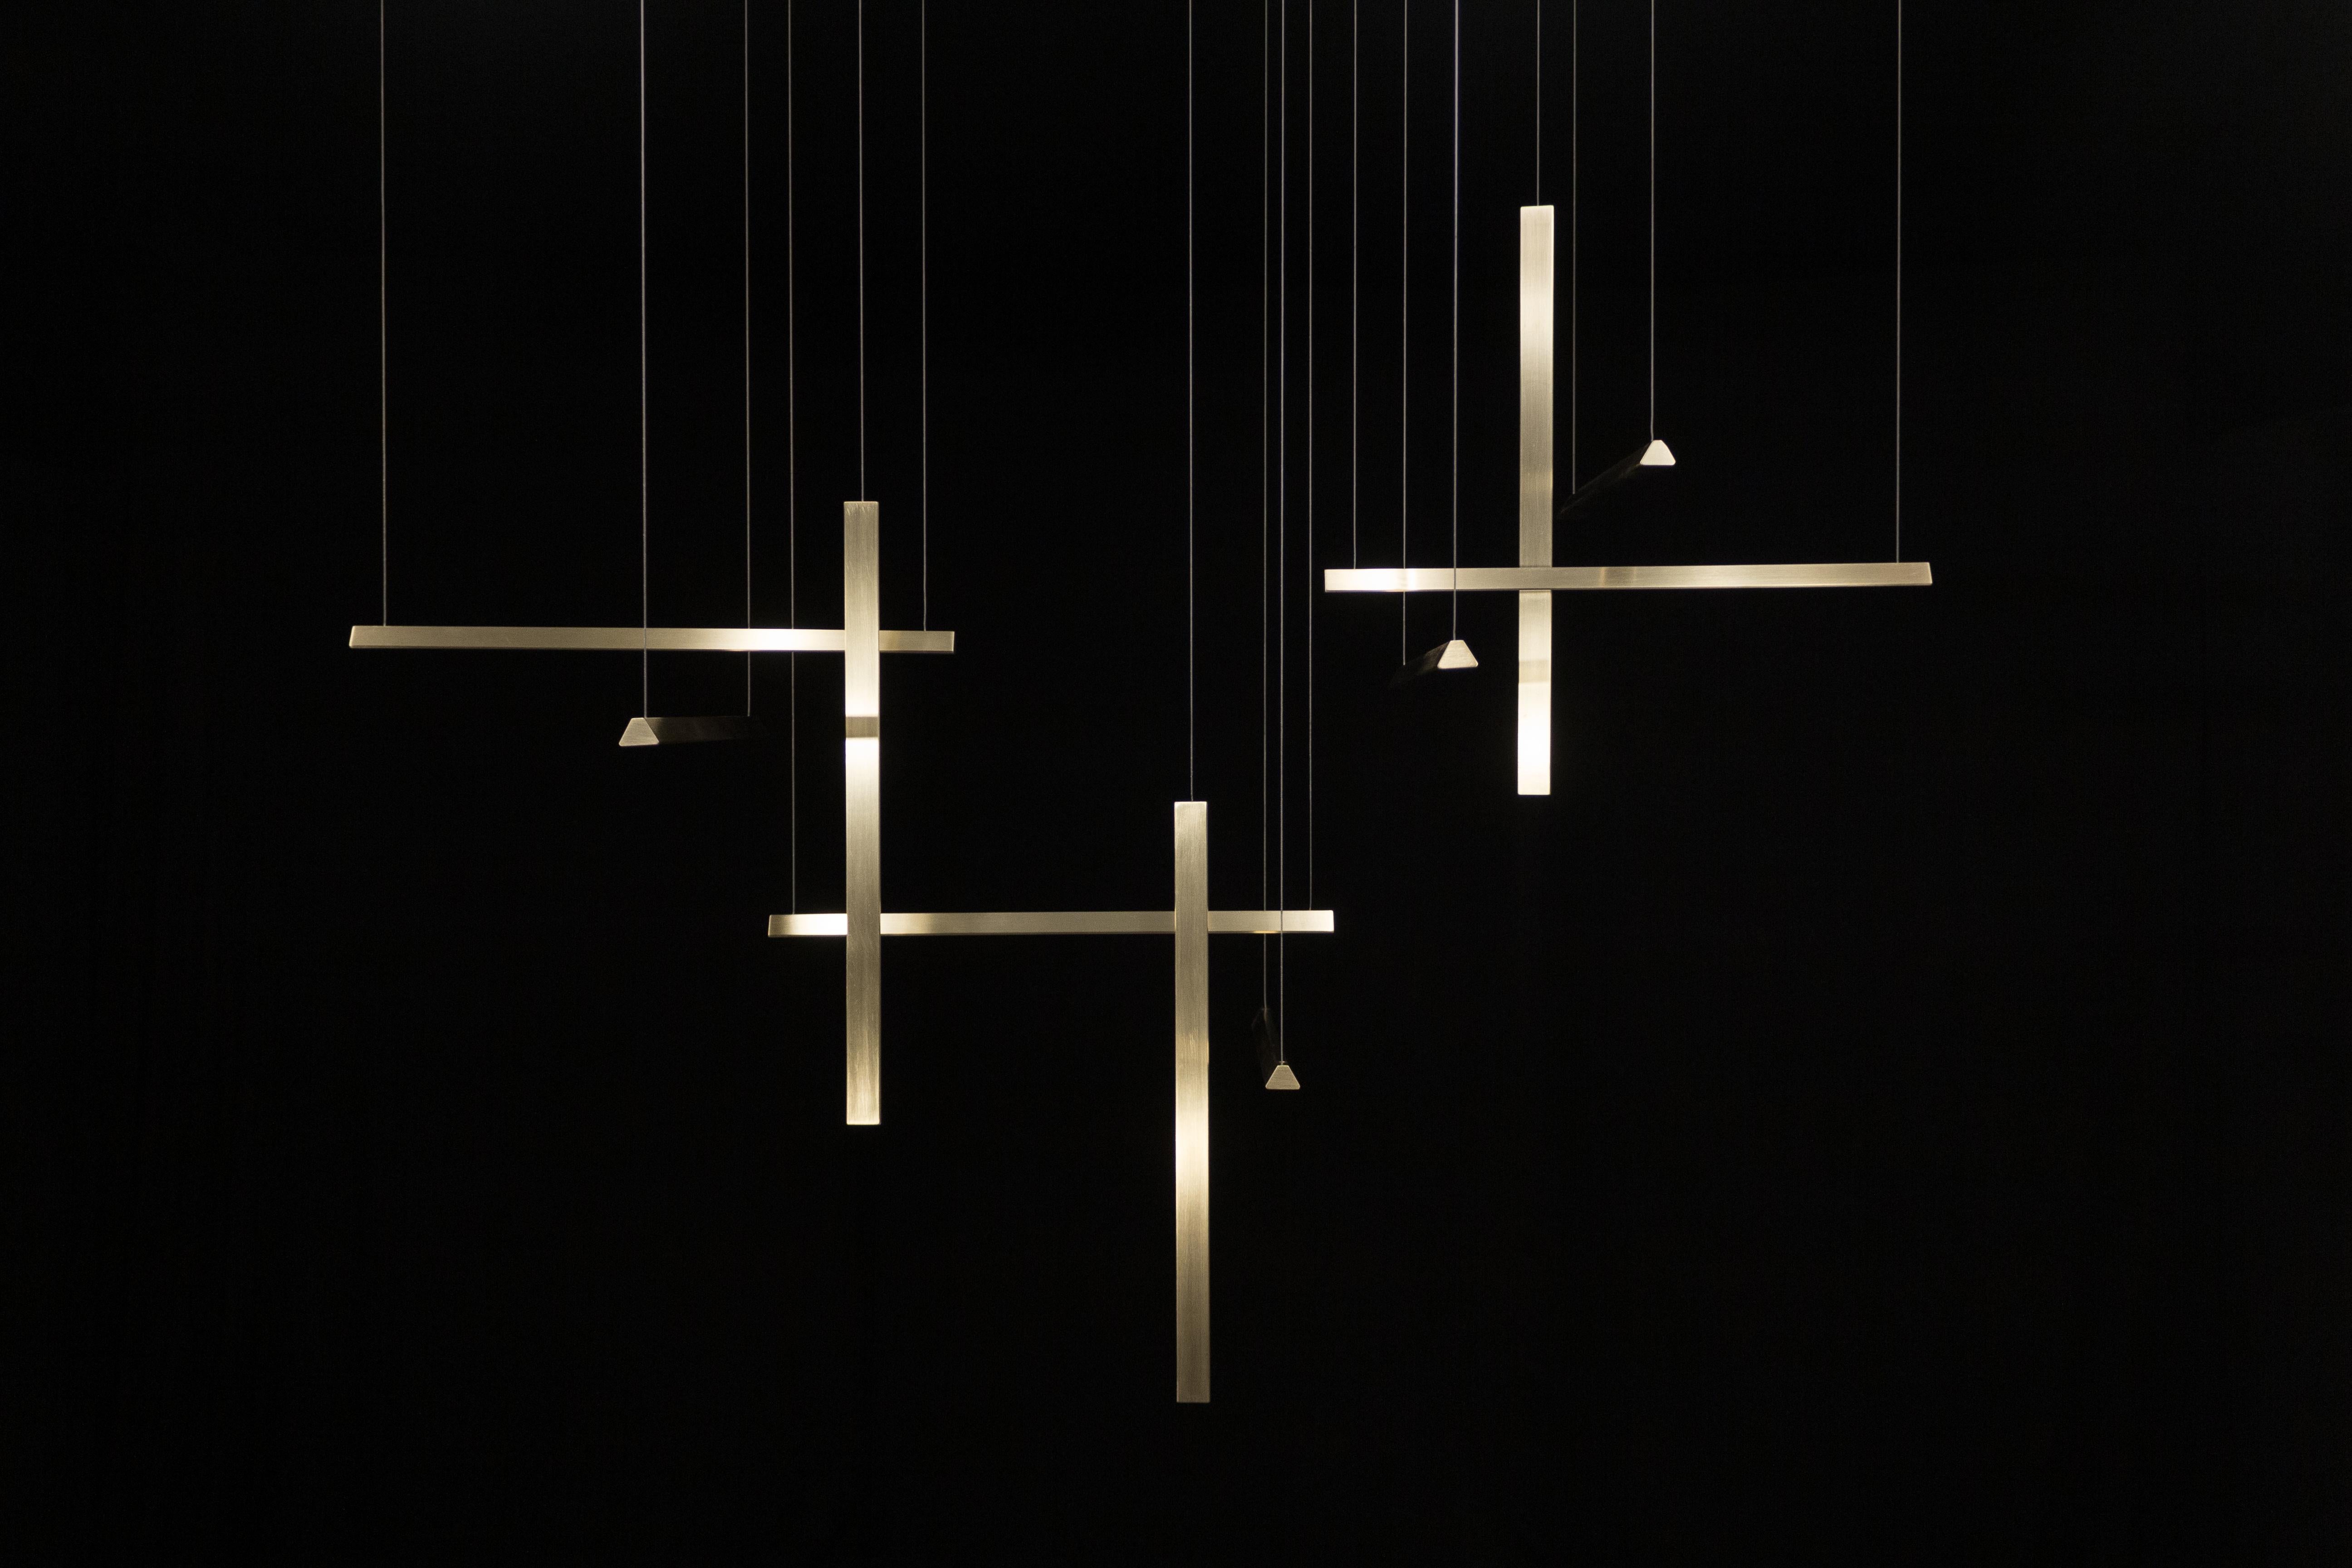 L 2500 Prisms Pendant Lamp C by Tanuj Arora
Dimensions: D 53 x W 250 x H 100 cm.
Materials: Solid Brass.
There are two kinds of prisms, 500 mm length and 360 mm length. They weigh approx. 1.7 kg and 1.2 kg each.
Total installation weight around 28